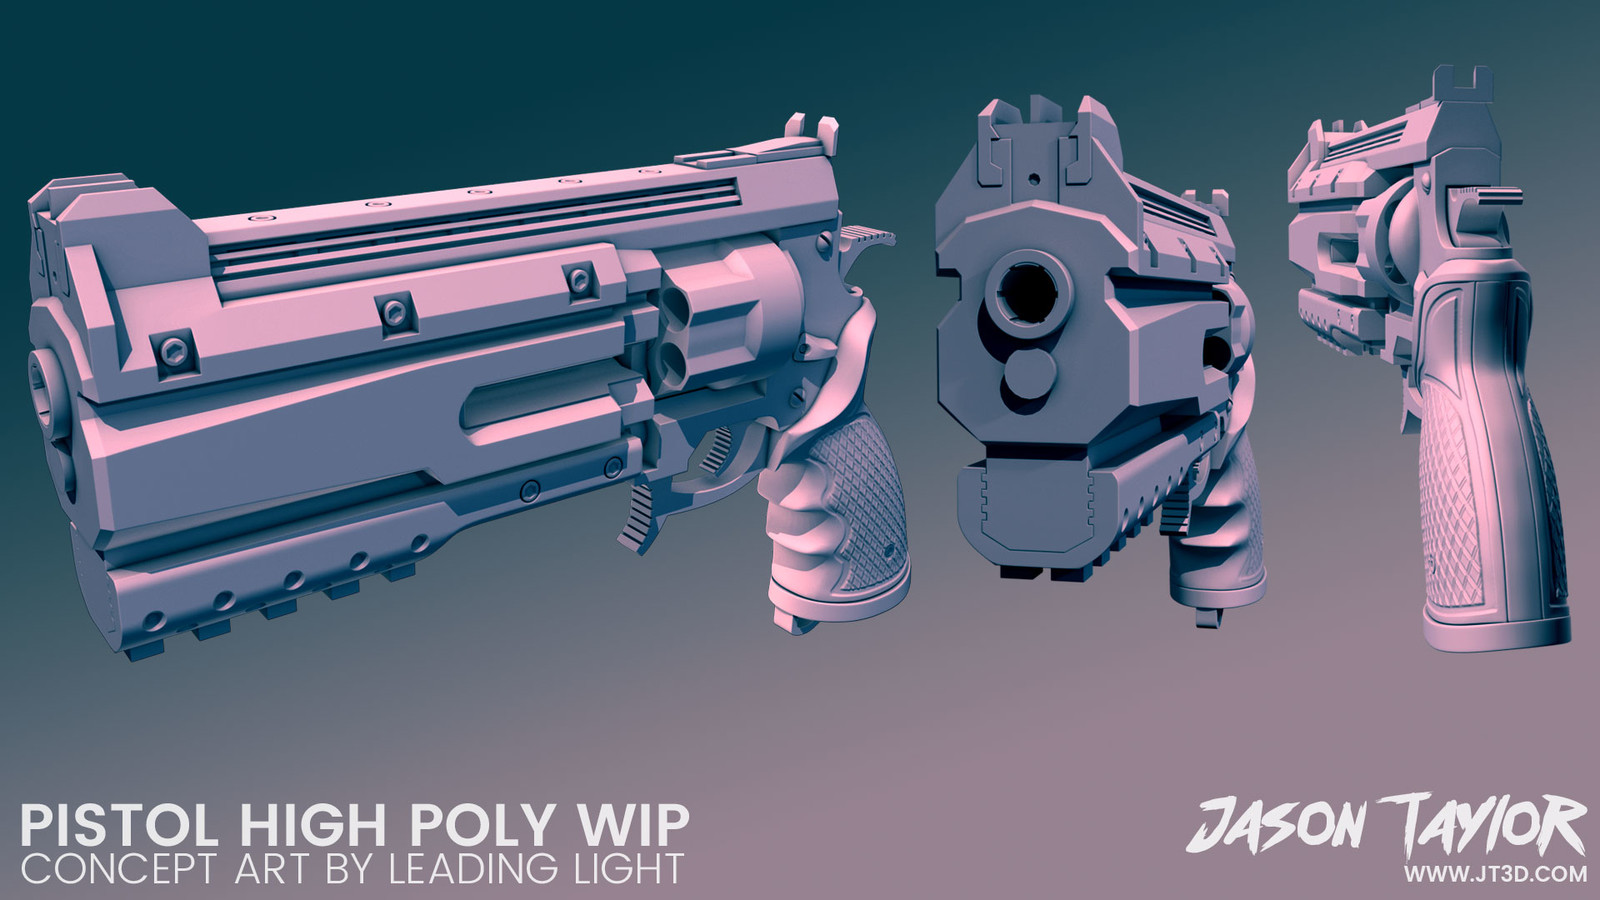 High poly work in progress.  Concept art by Leading Light.